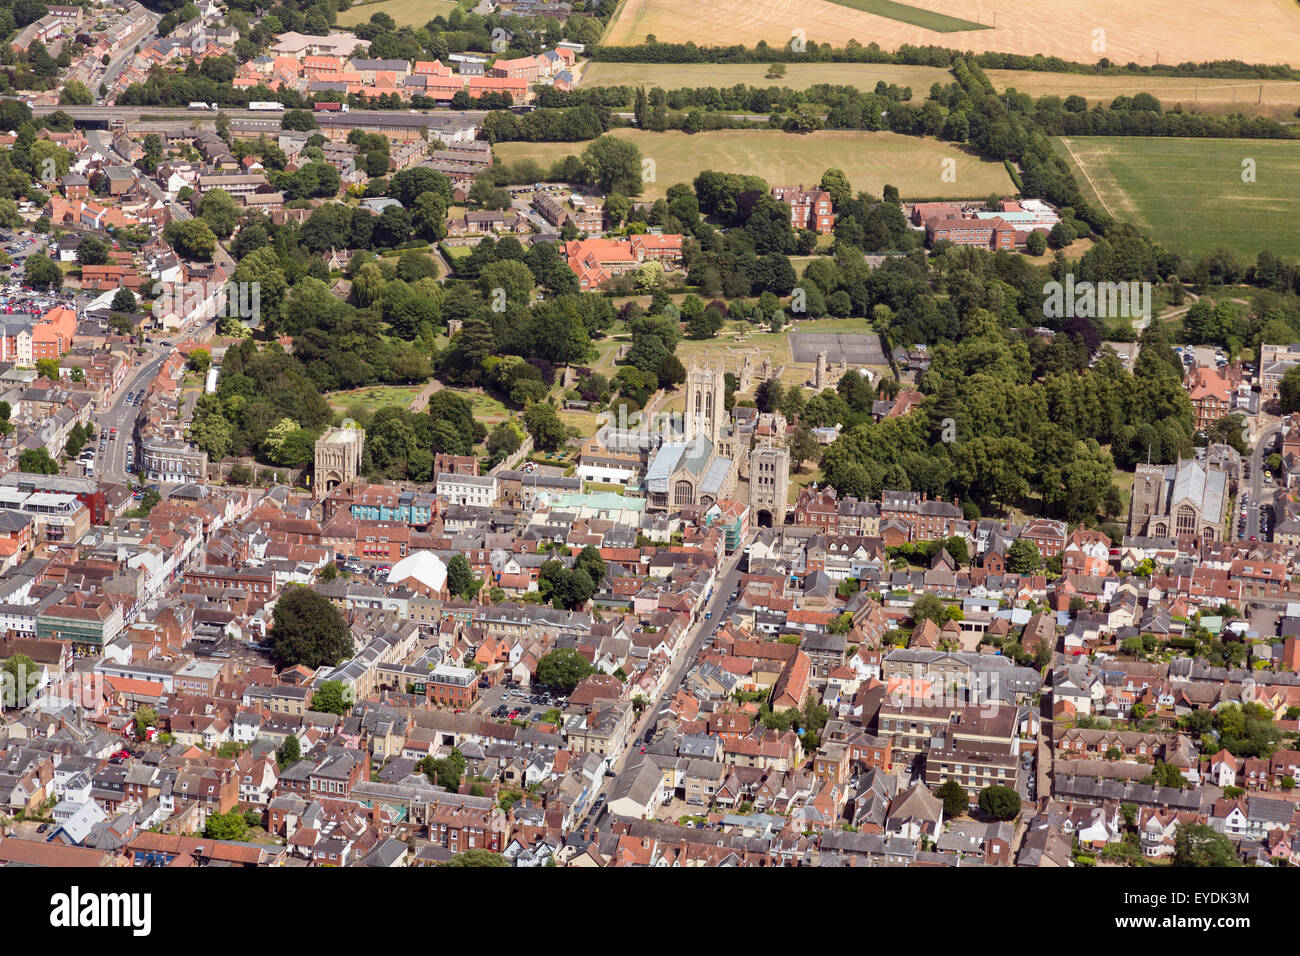 Bury St Edmunds town centre, St Edmundsbury Cathedral and Abbey gardens, aerial photo, UK Stock Photo